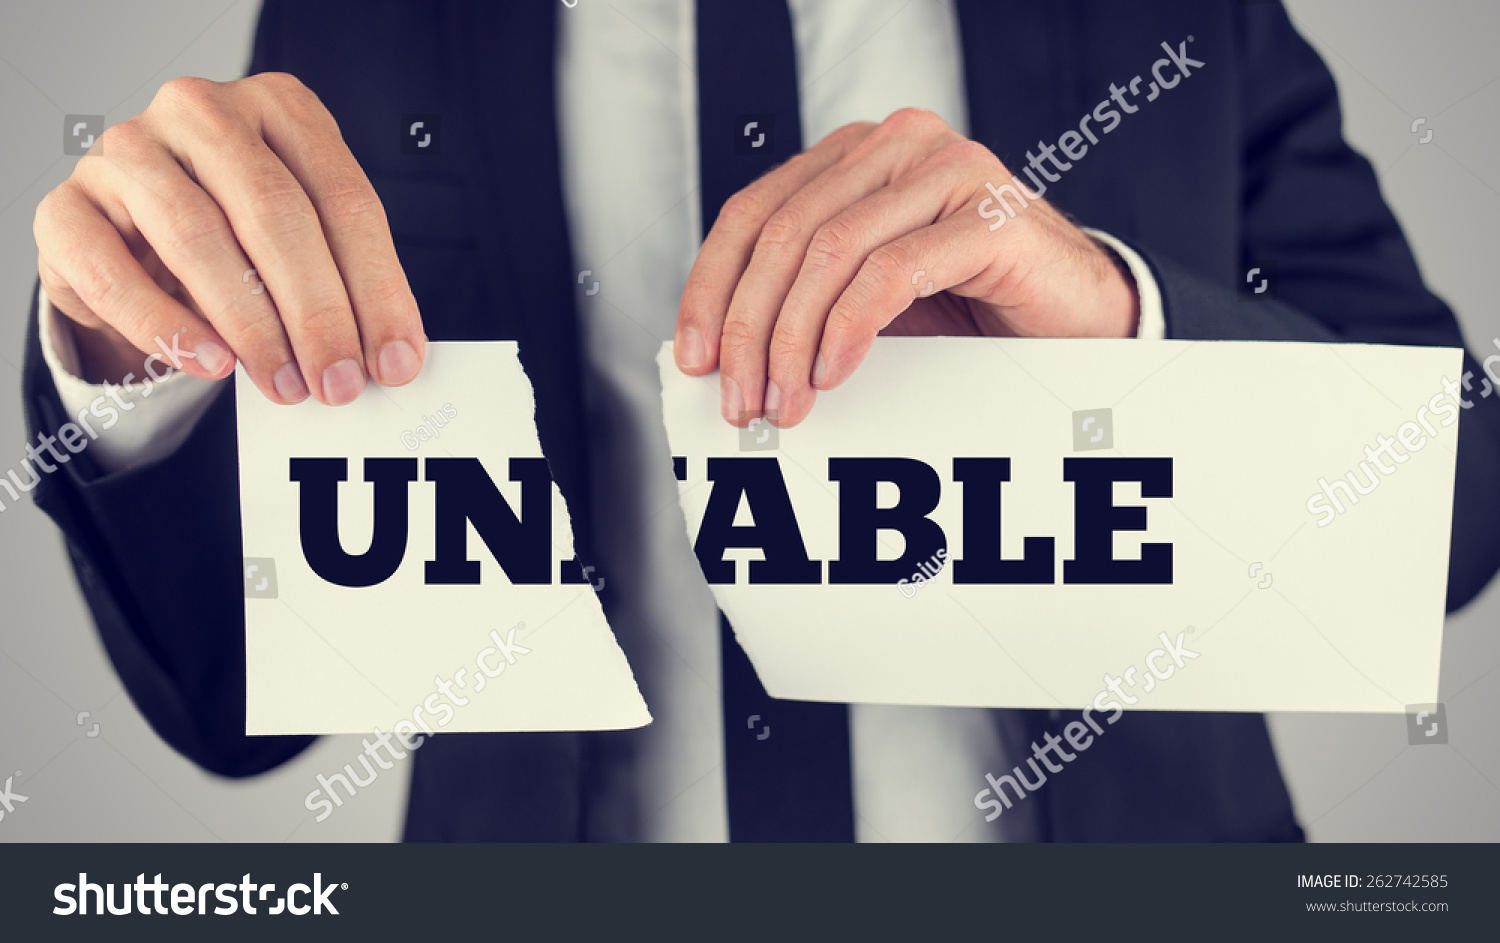 Retro vintage style image of a man holding a torn paper sign in his hands with the words - Un - Able- spread over the two halves depicting the concept of opposites. #262742585